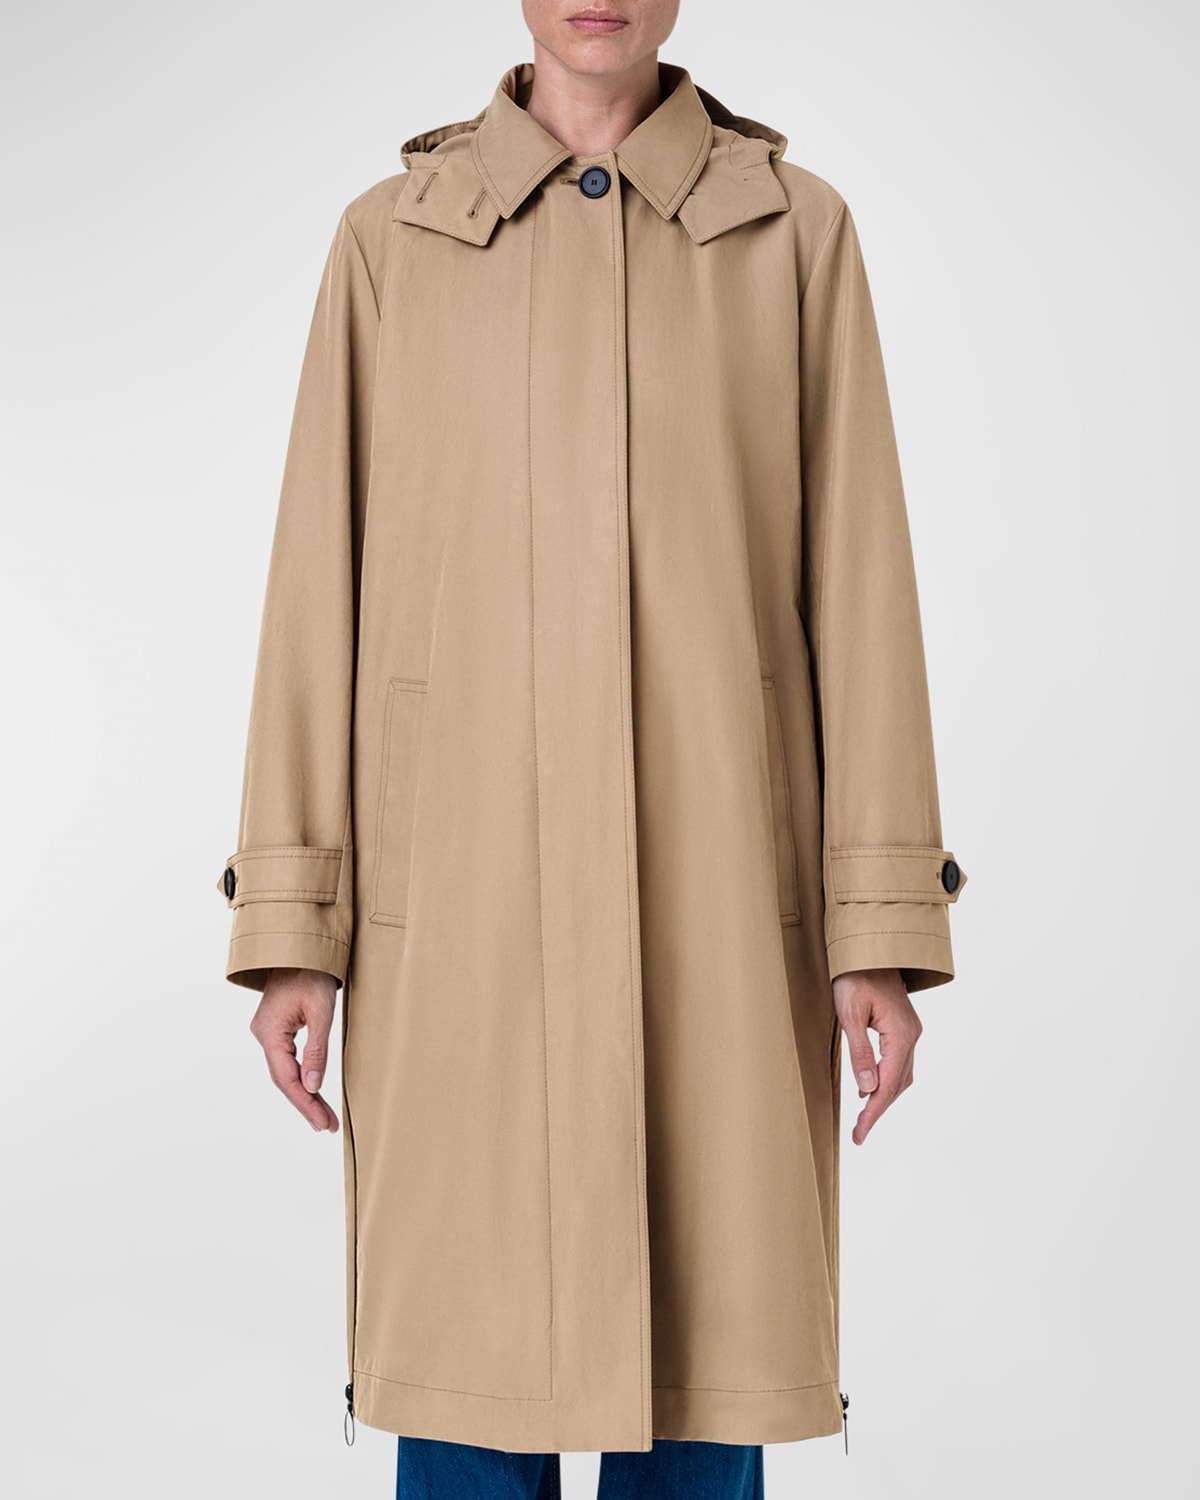 Akris Punto Cotton Blend Bicycle Parka With Detachable Hood In Cashew